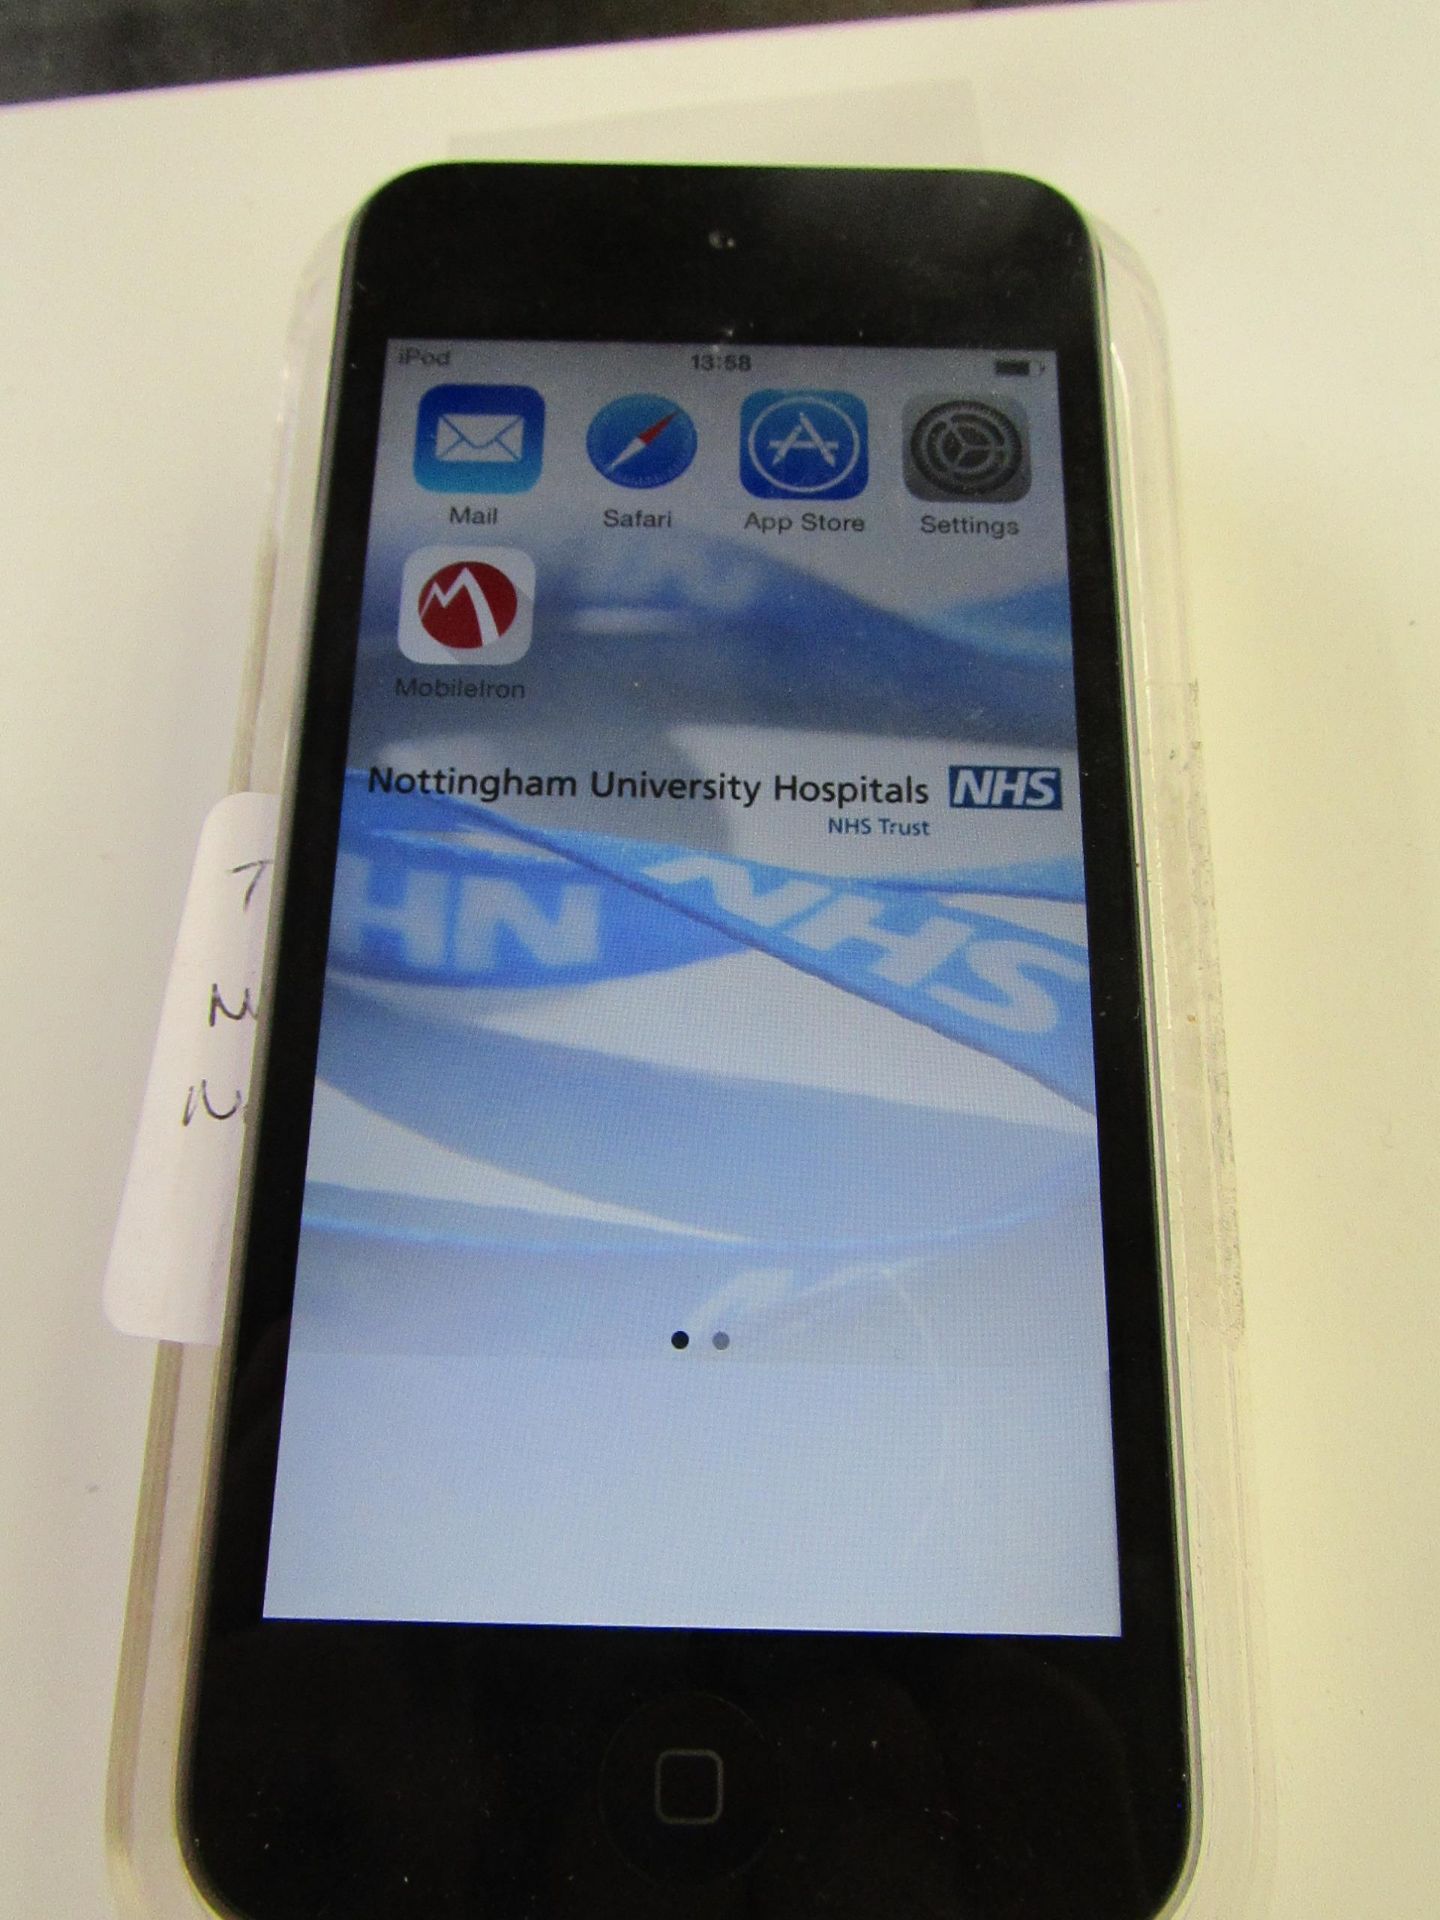 Apple iPod Touch 5th Generation, 16GB, fully tested working. Comes with case. RRP £99.99